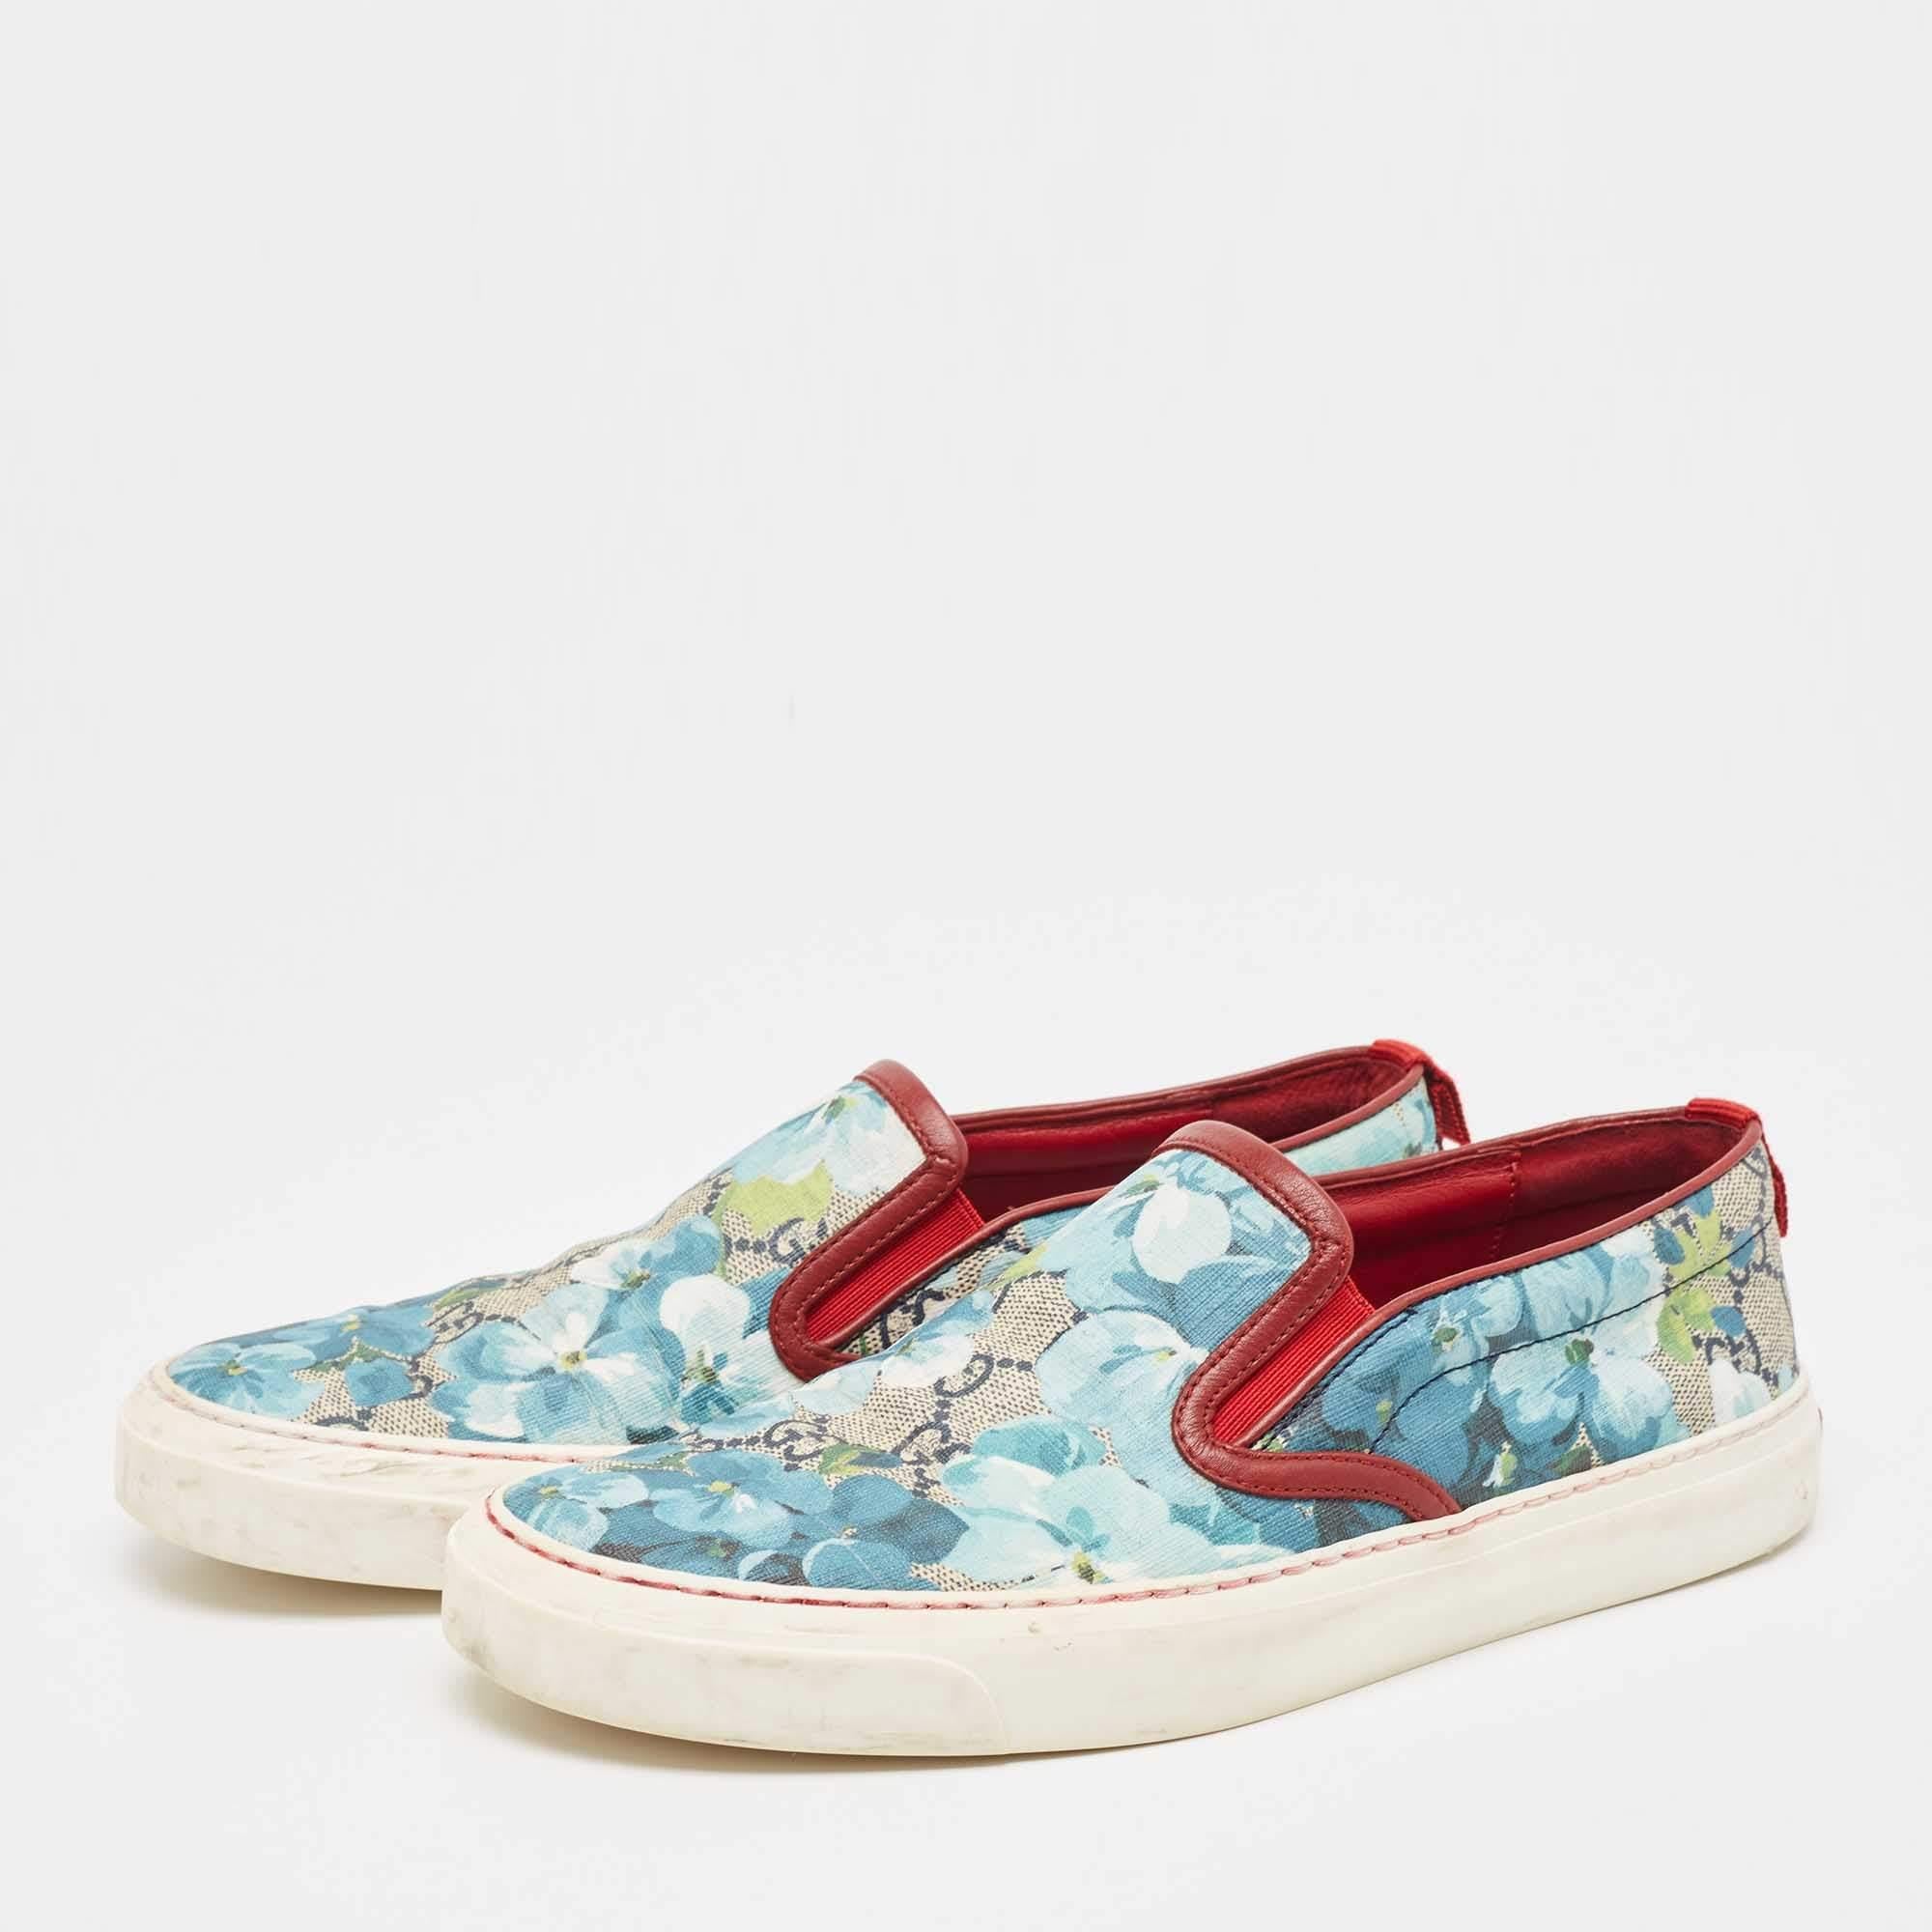 Gucci Multicolor GG Supreme Blooms Printed Canvas Slip On Sneakers Size 37.5 For Sale 3